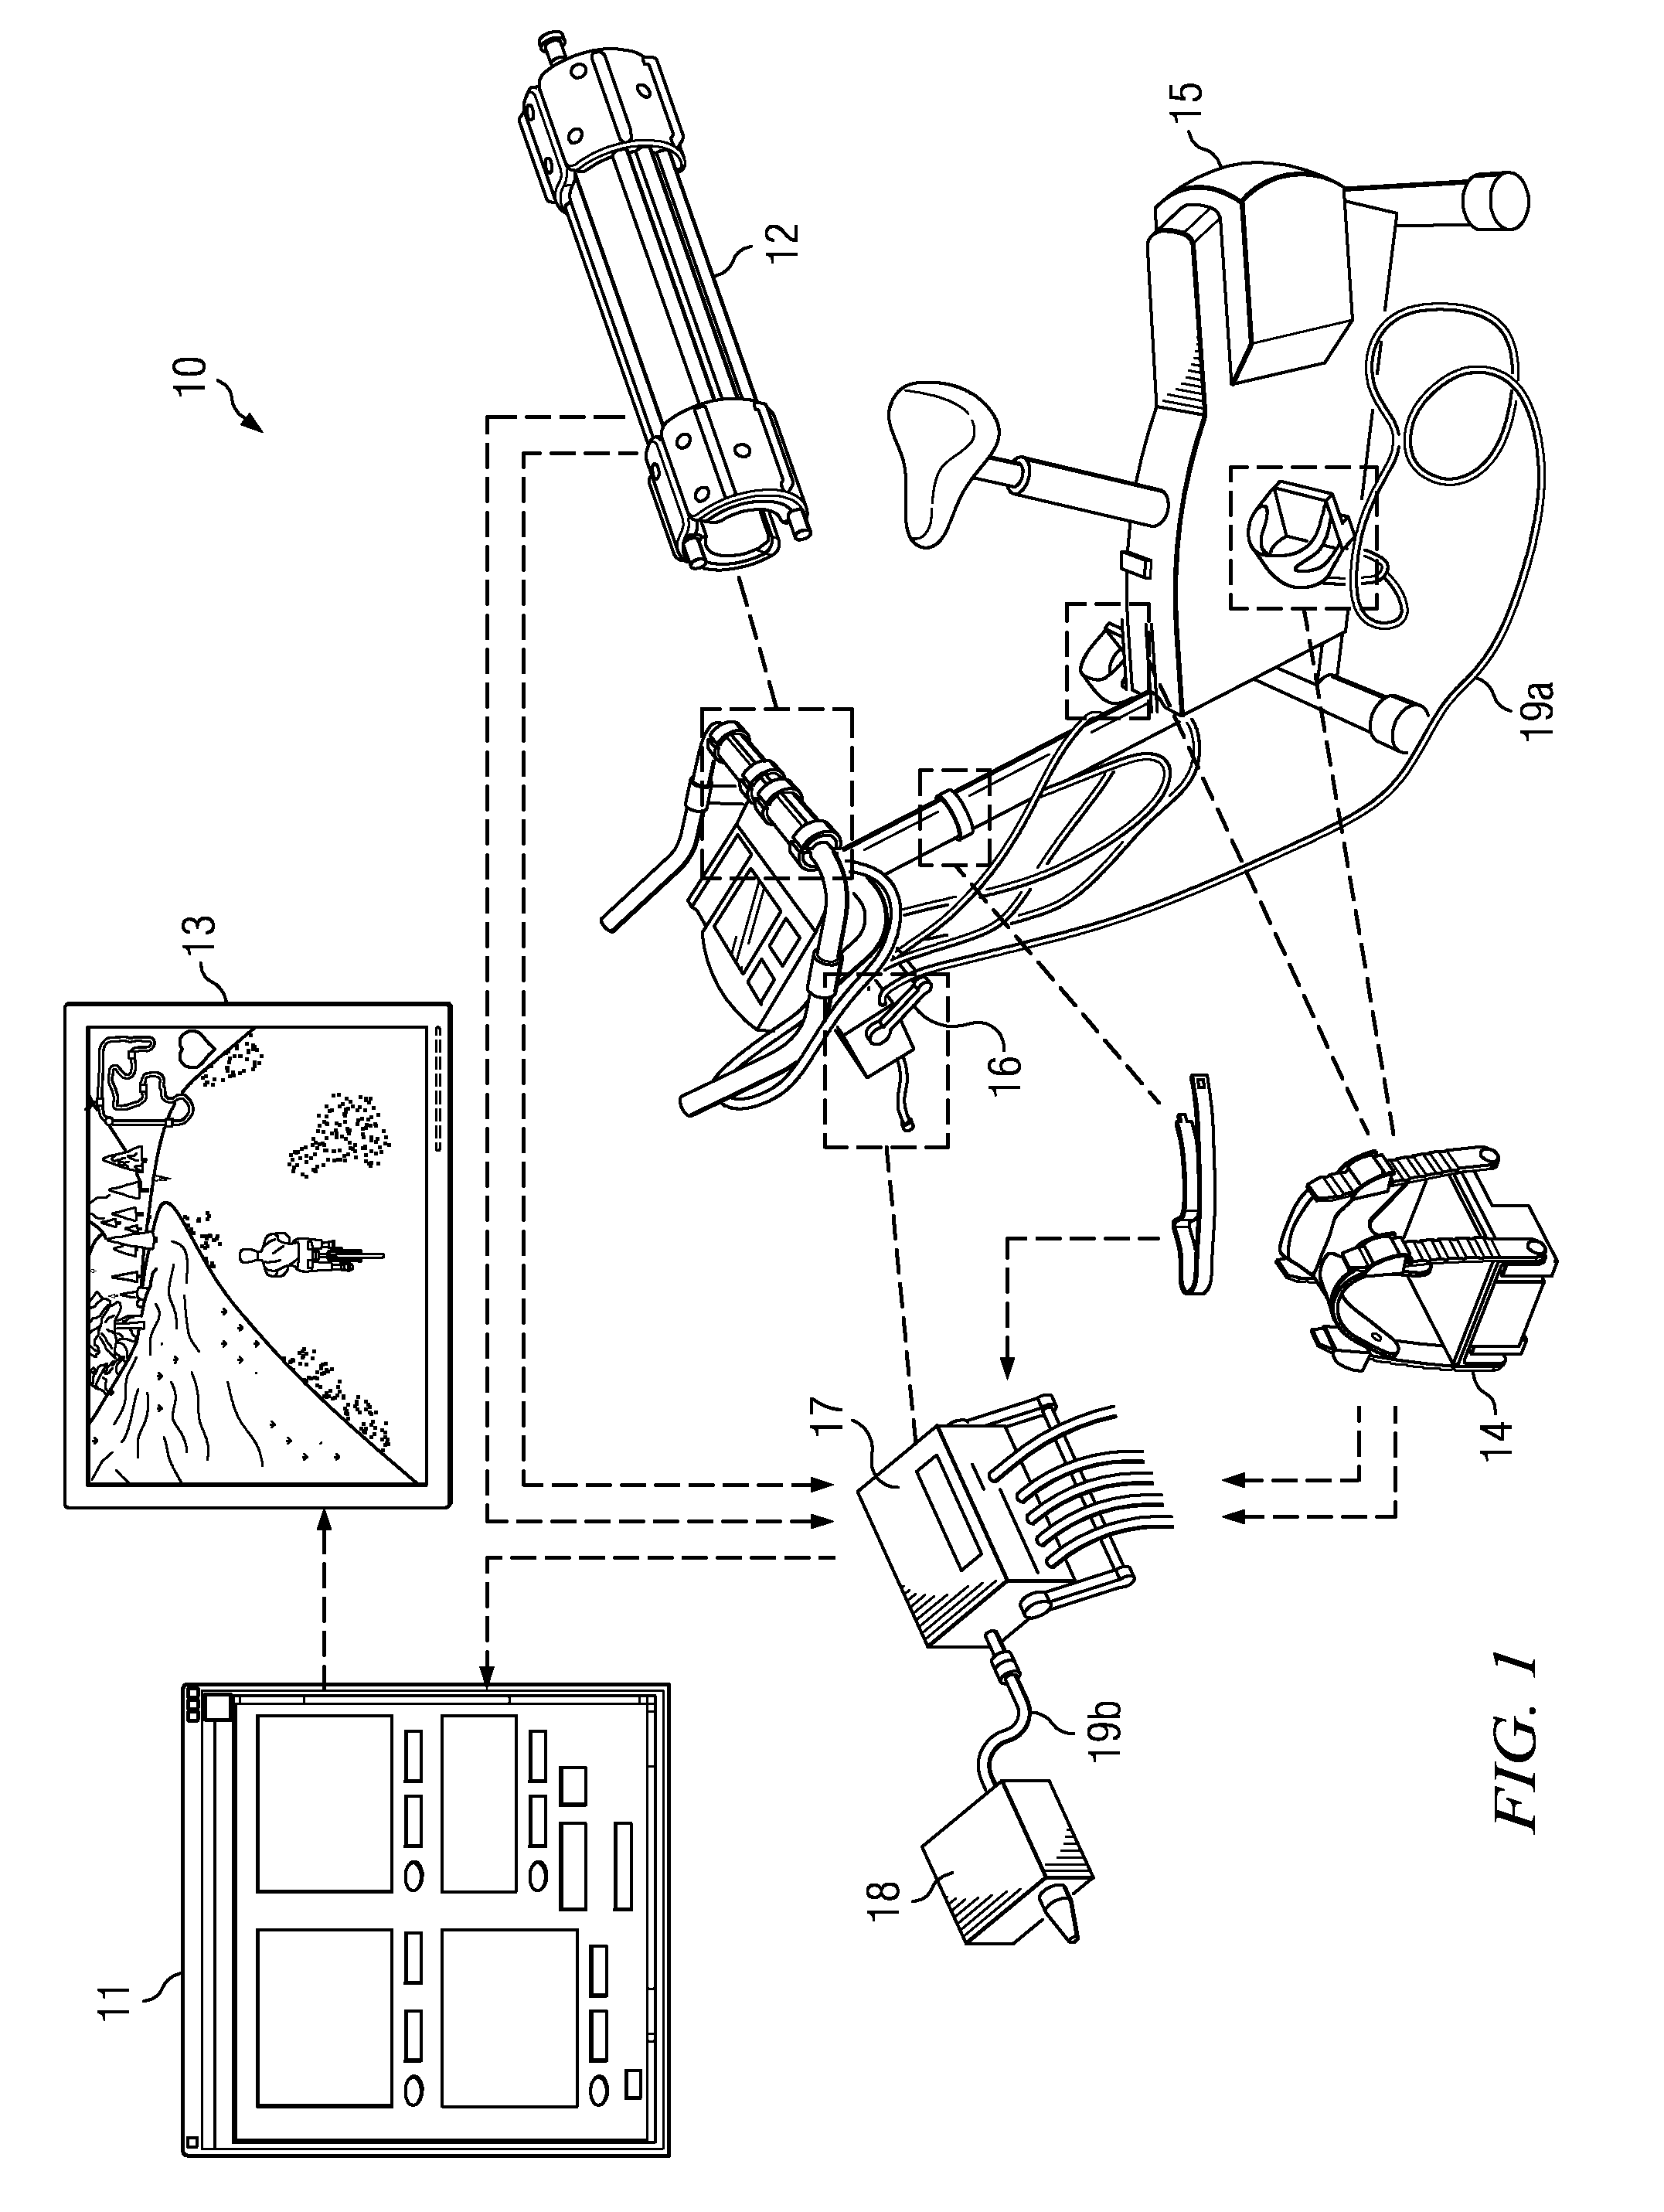 Instrumented handle and pedal systems for use in rehabilitation, exercise and training equipment